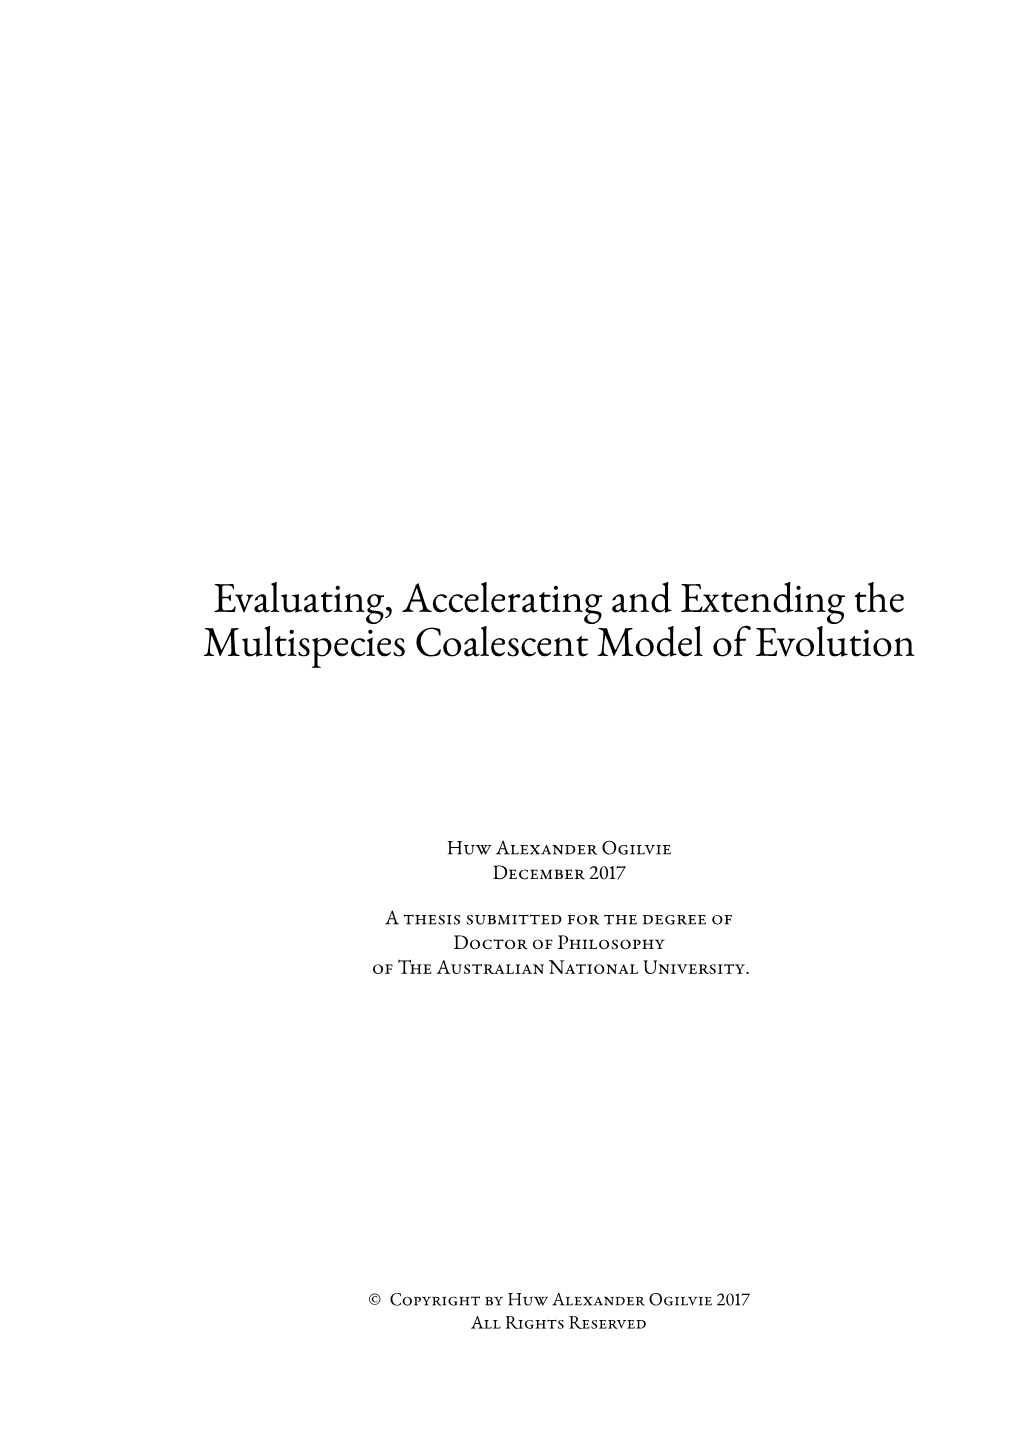 Evaluating, Accelerating and Extending the Multispecies Coalescent Model of Evolution